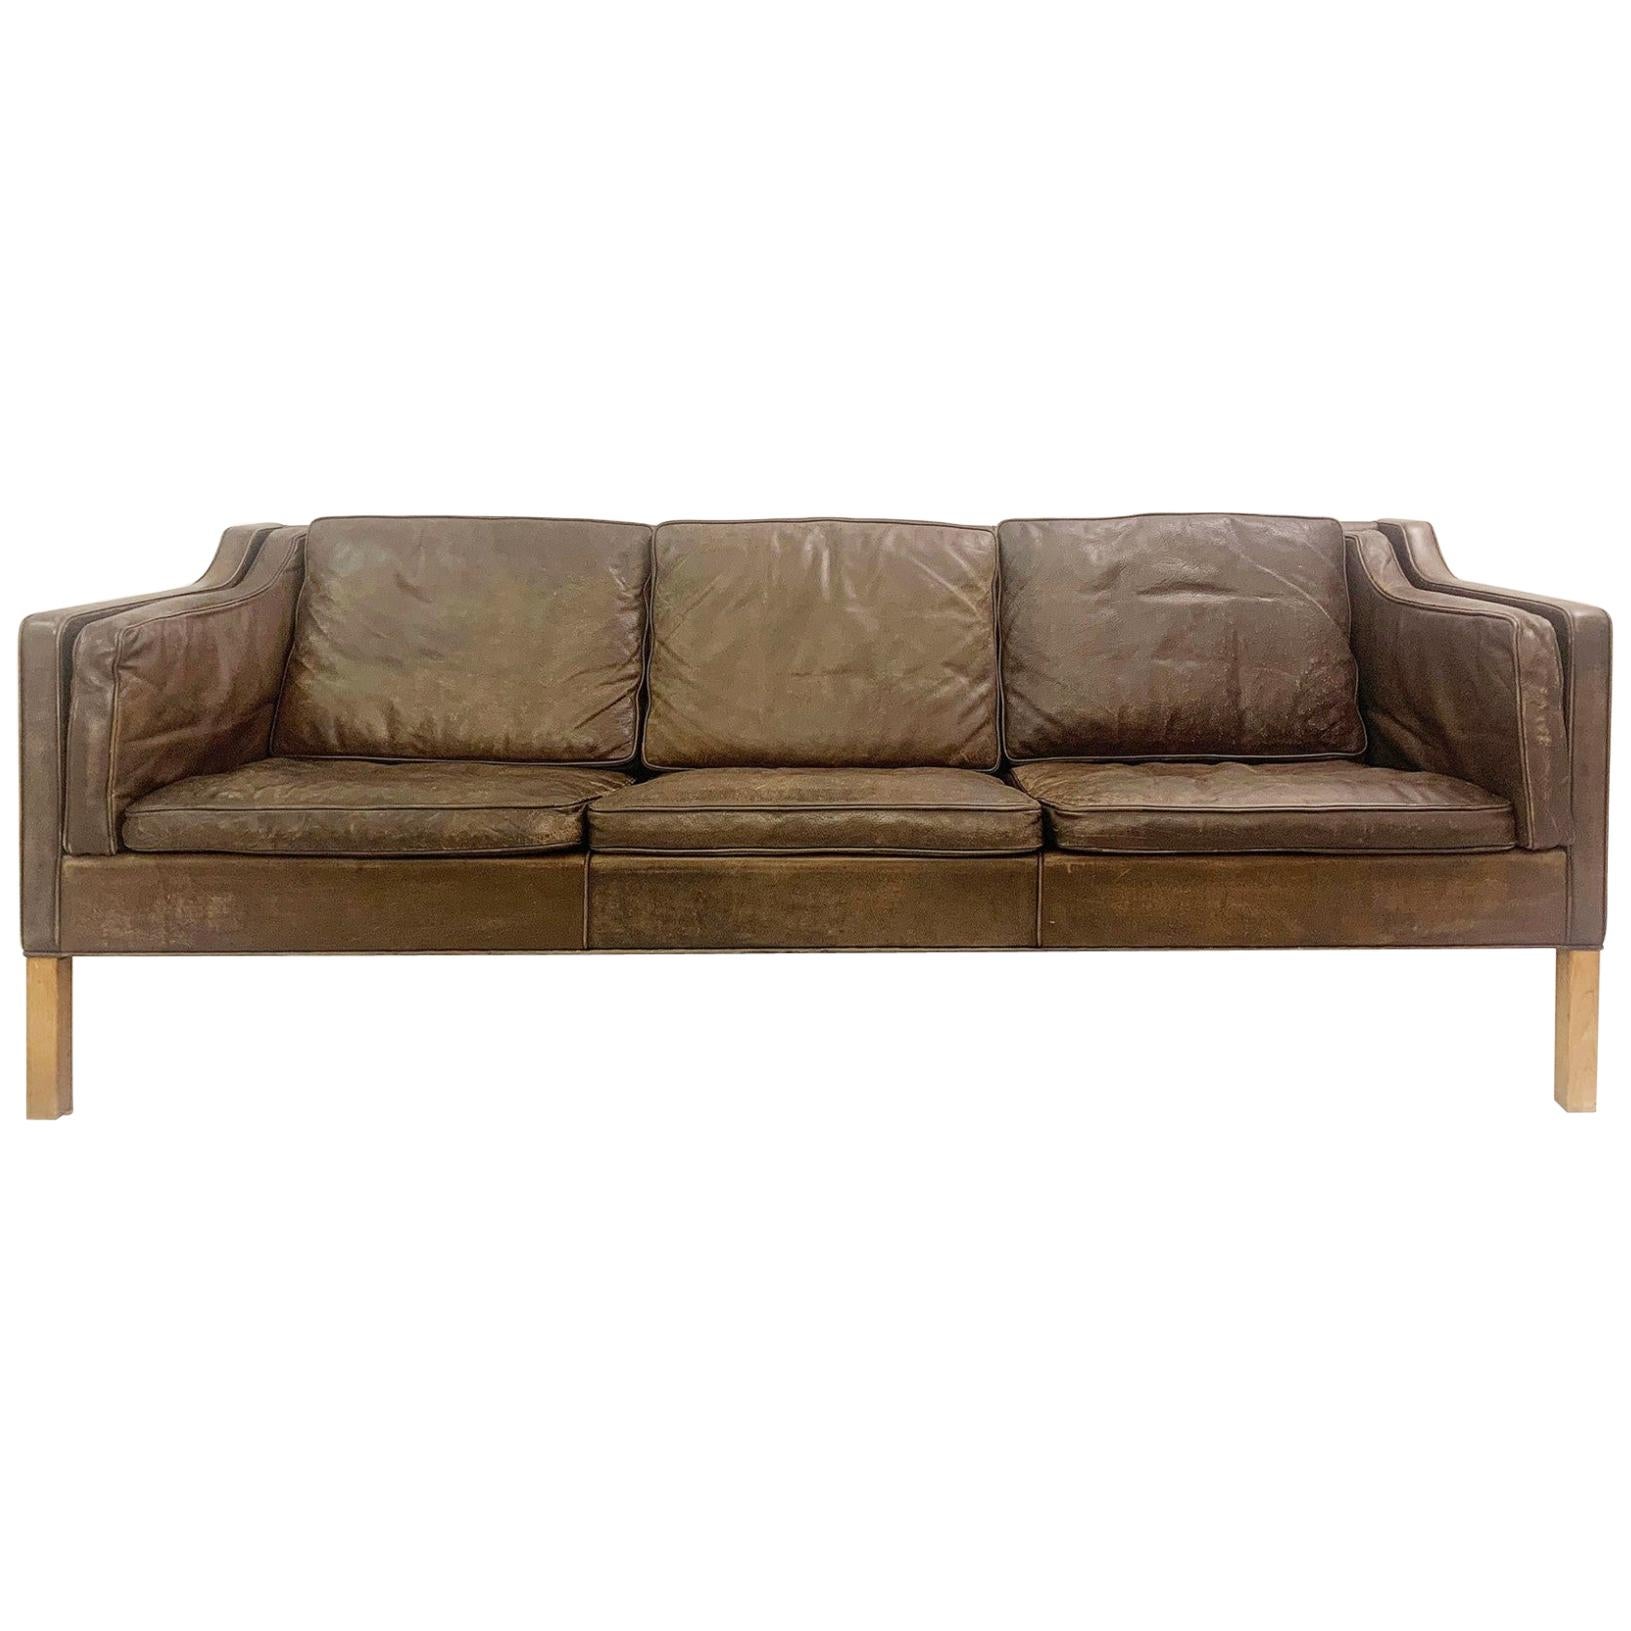 '2213' Leather and Oak 3-Seat Sofa by Børge Mogensen for Fredericia, Danish, 1